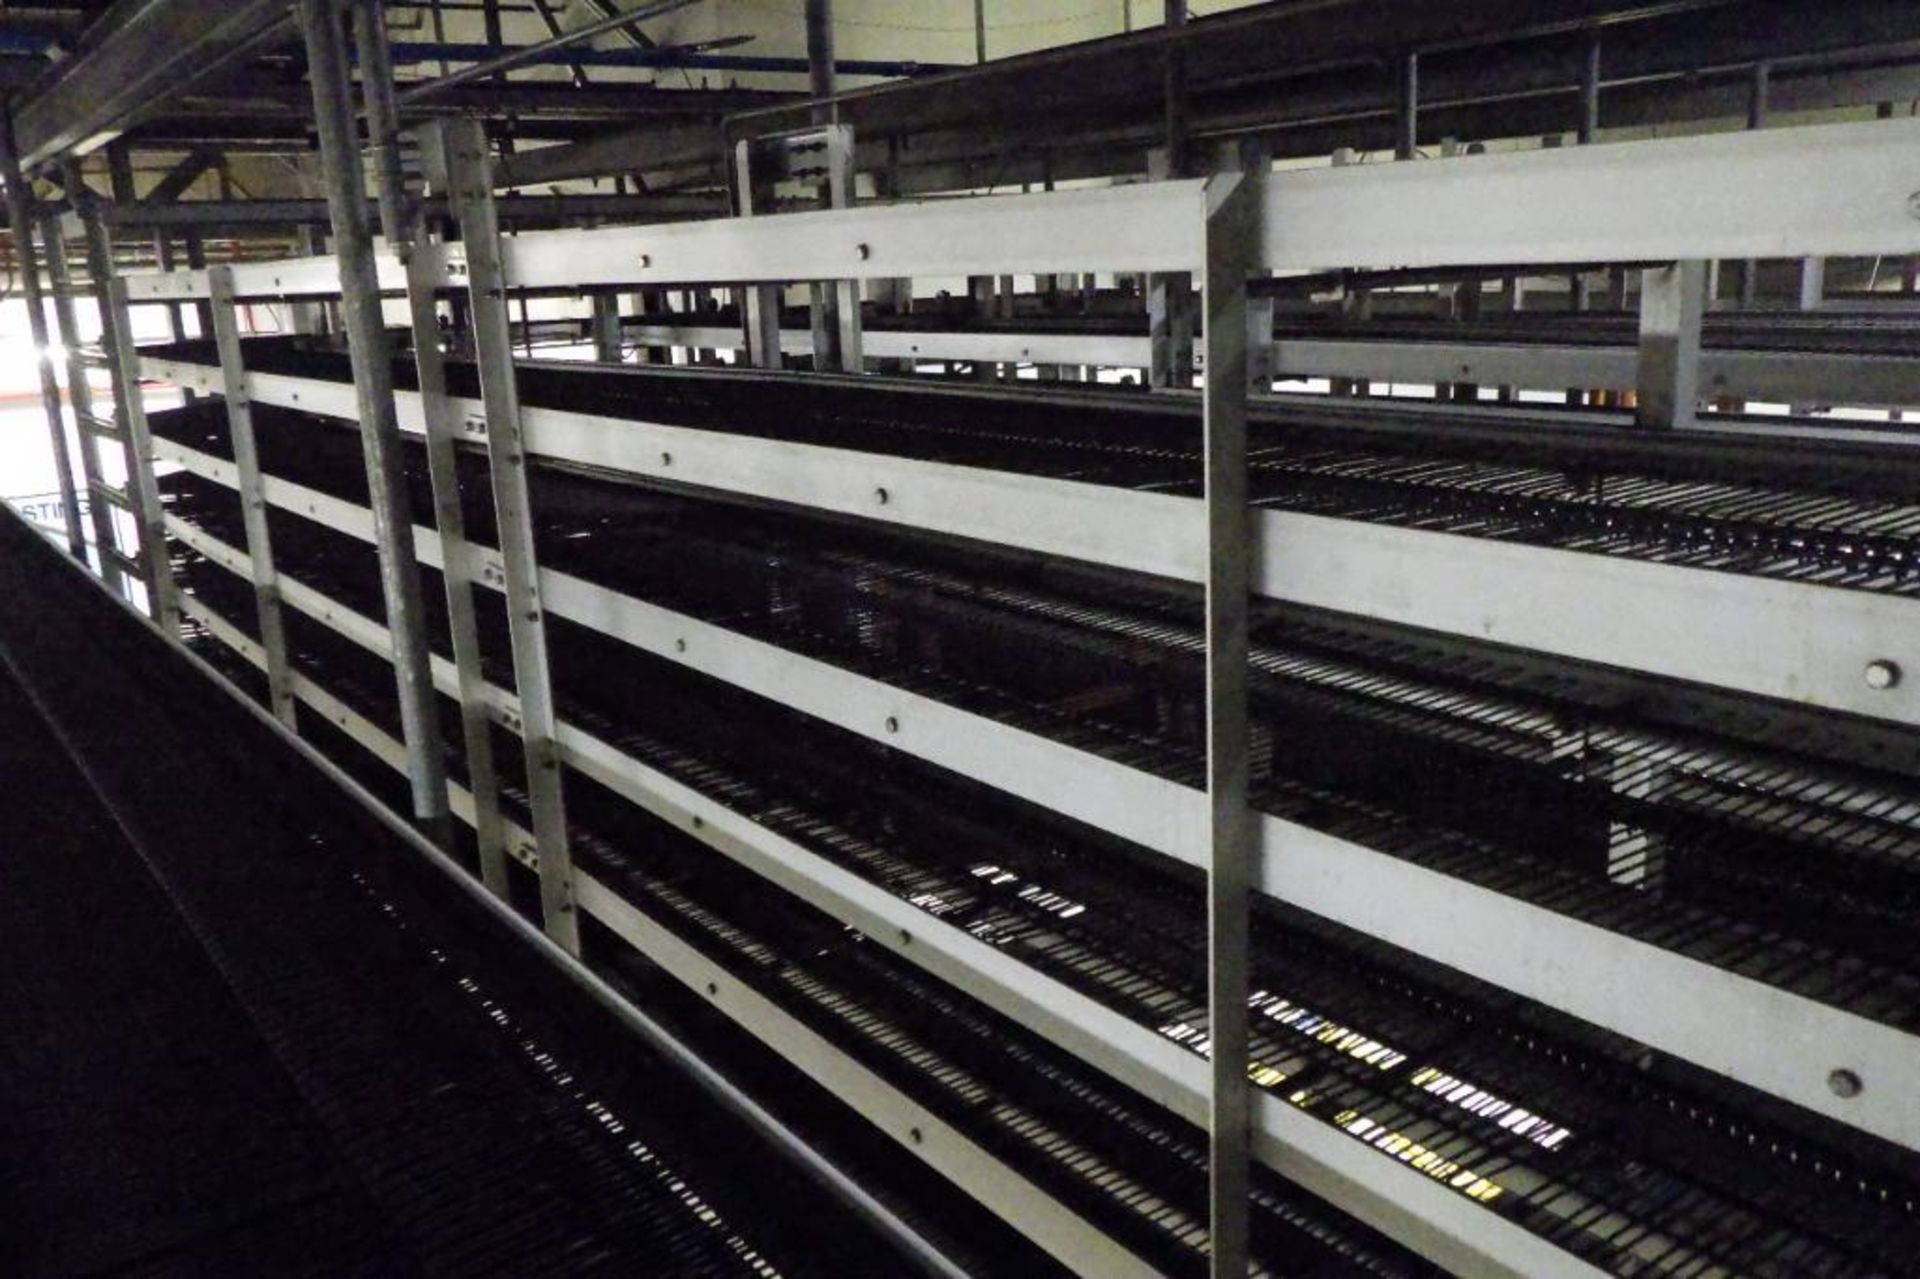 Stewart systems racetrack cooling conveyor - Image 17 of 26